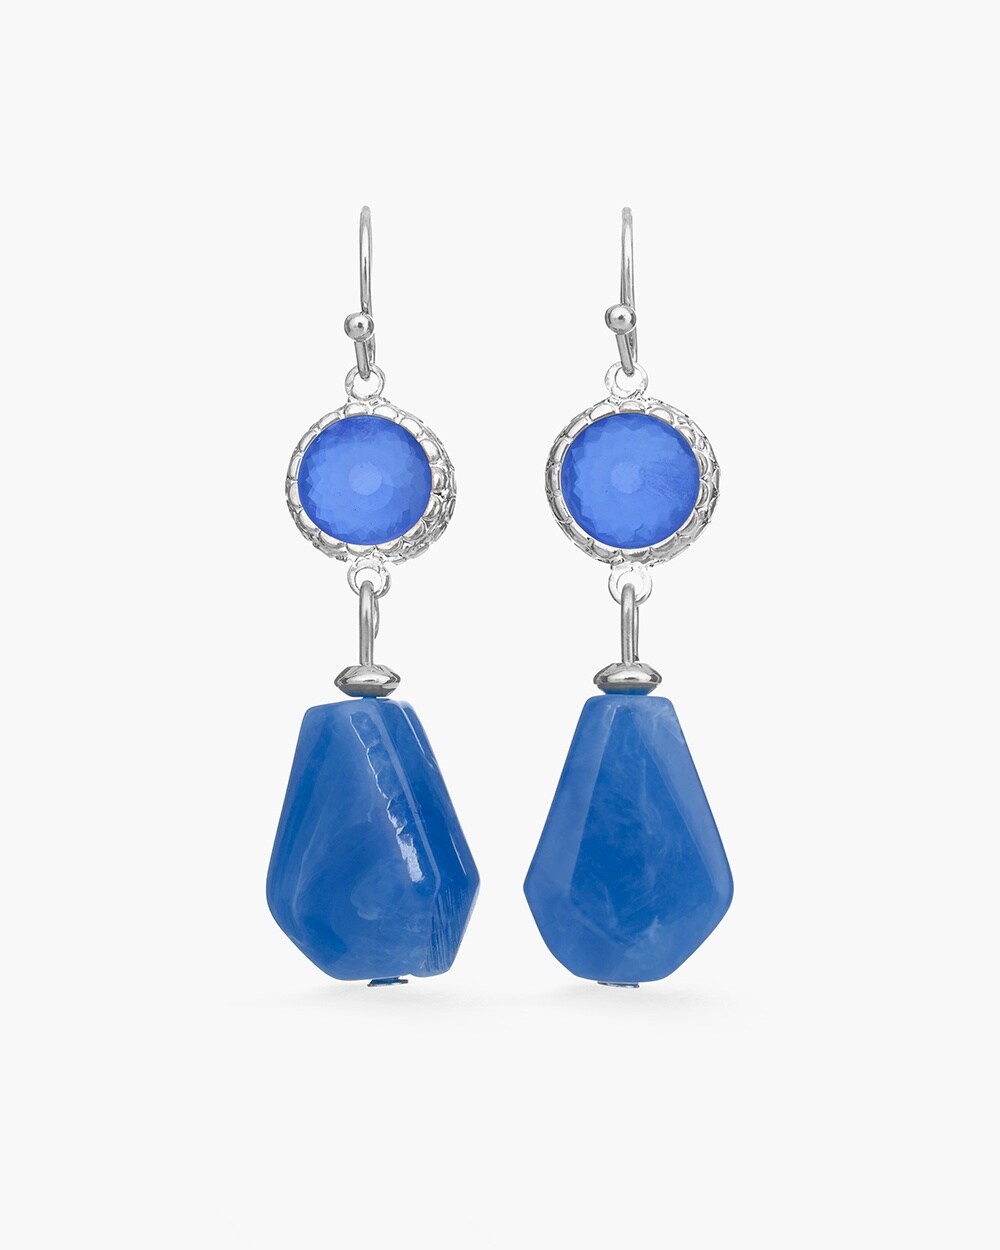 Blue and Silver-Tone Drop Earrings